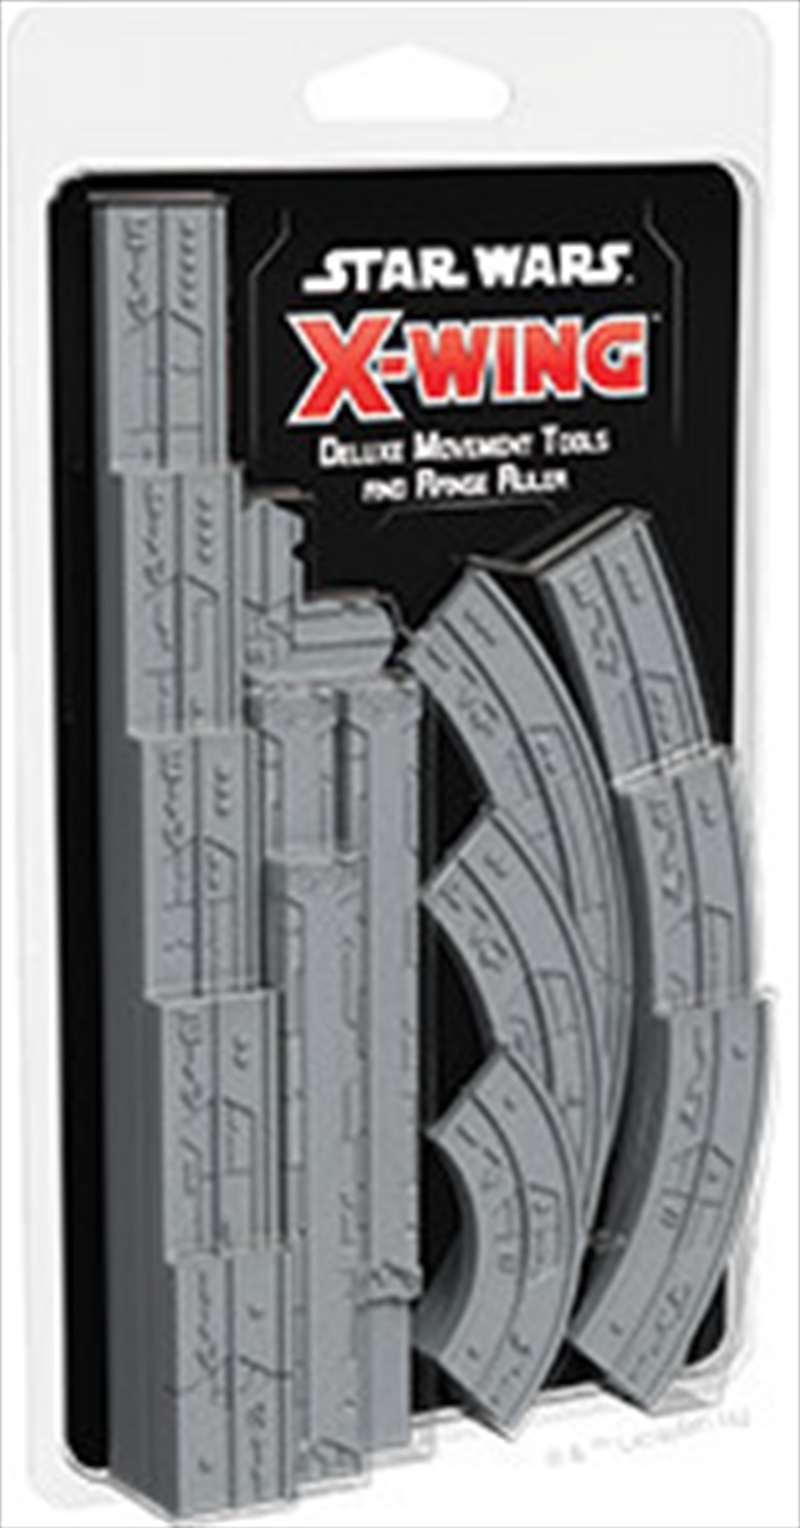 Star Wars X-Wing 2nd Edition Deluxe Movement Tools and Range Ruler/Product Detail/Board Games